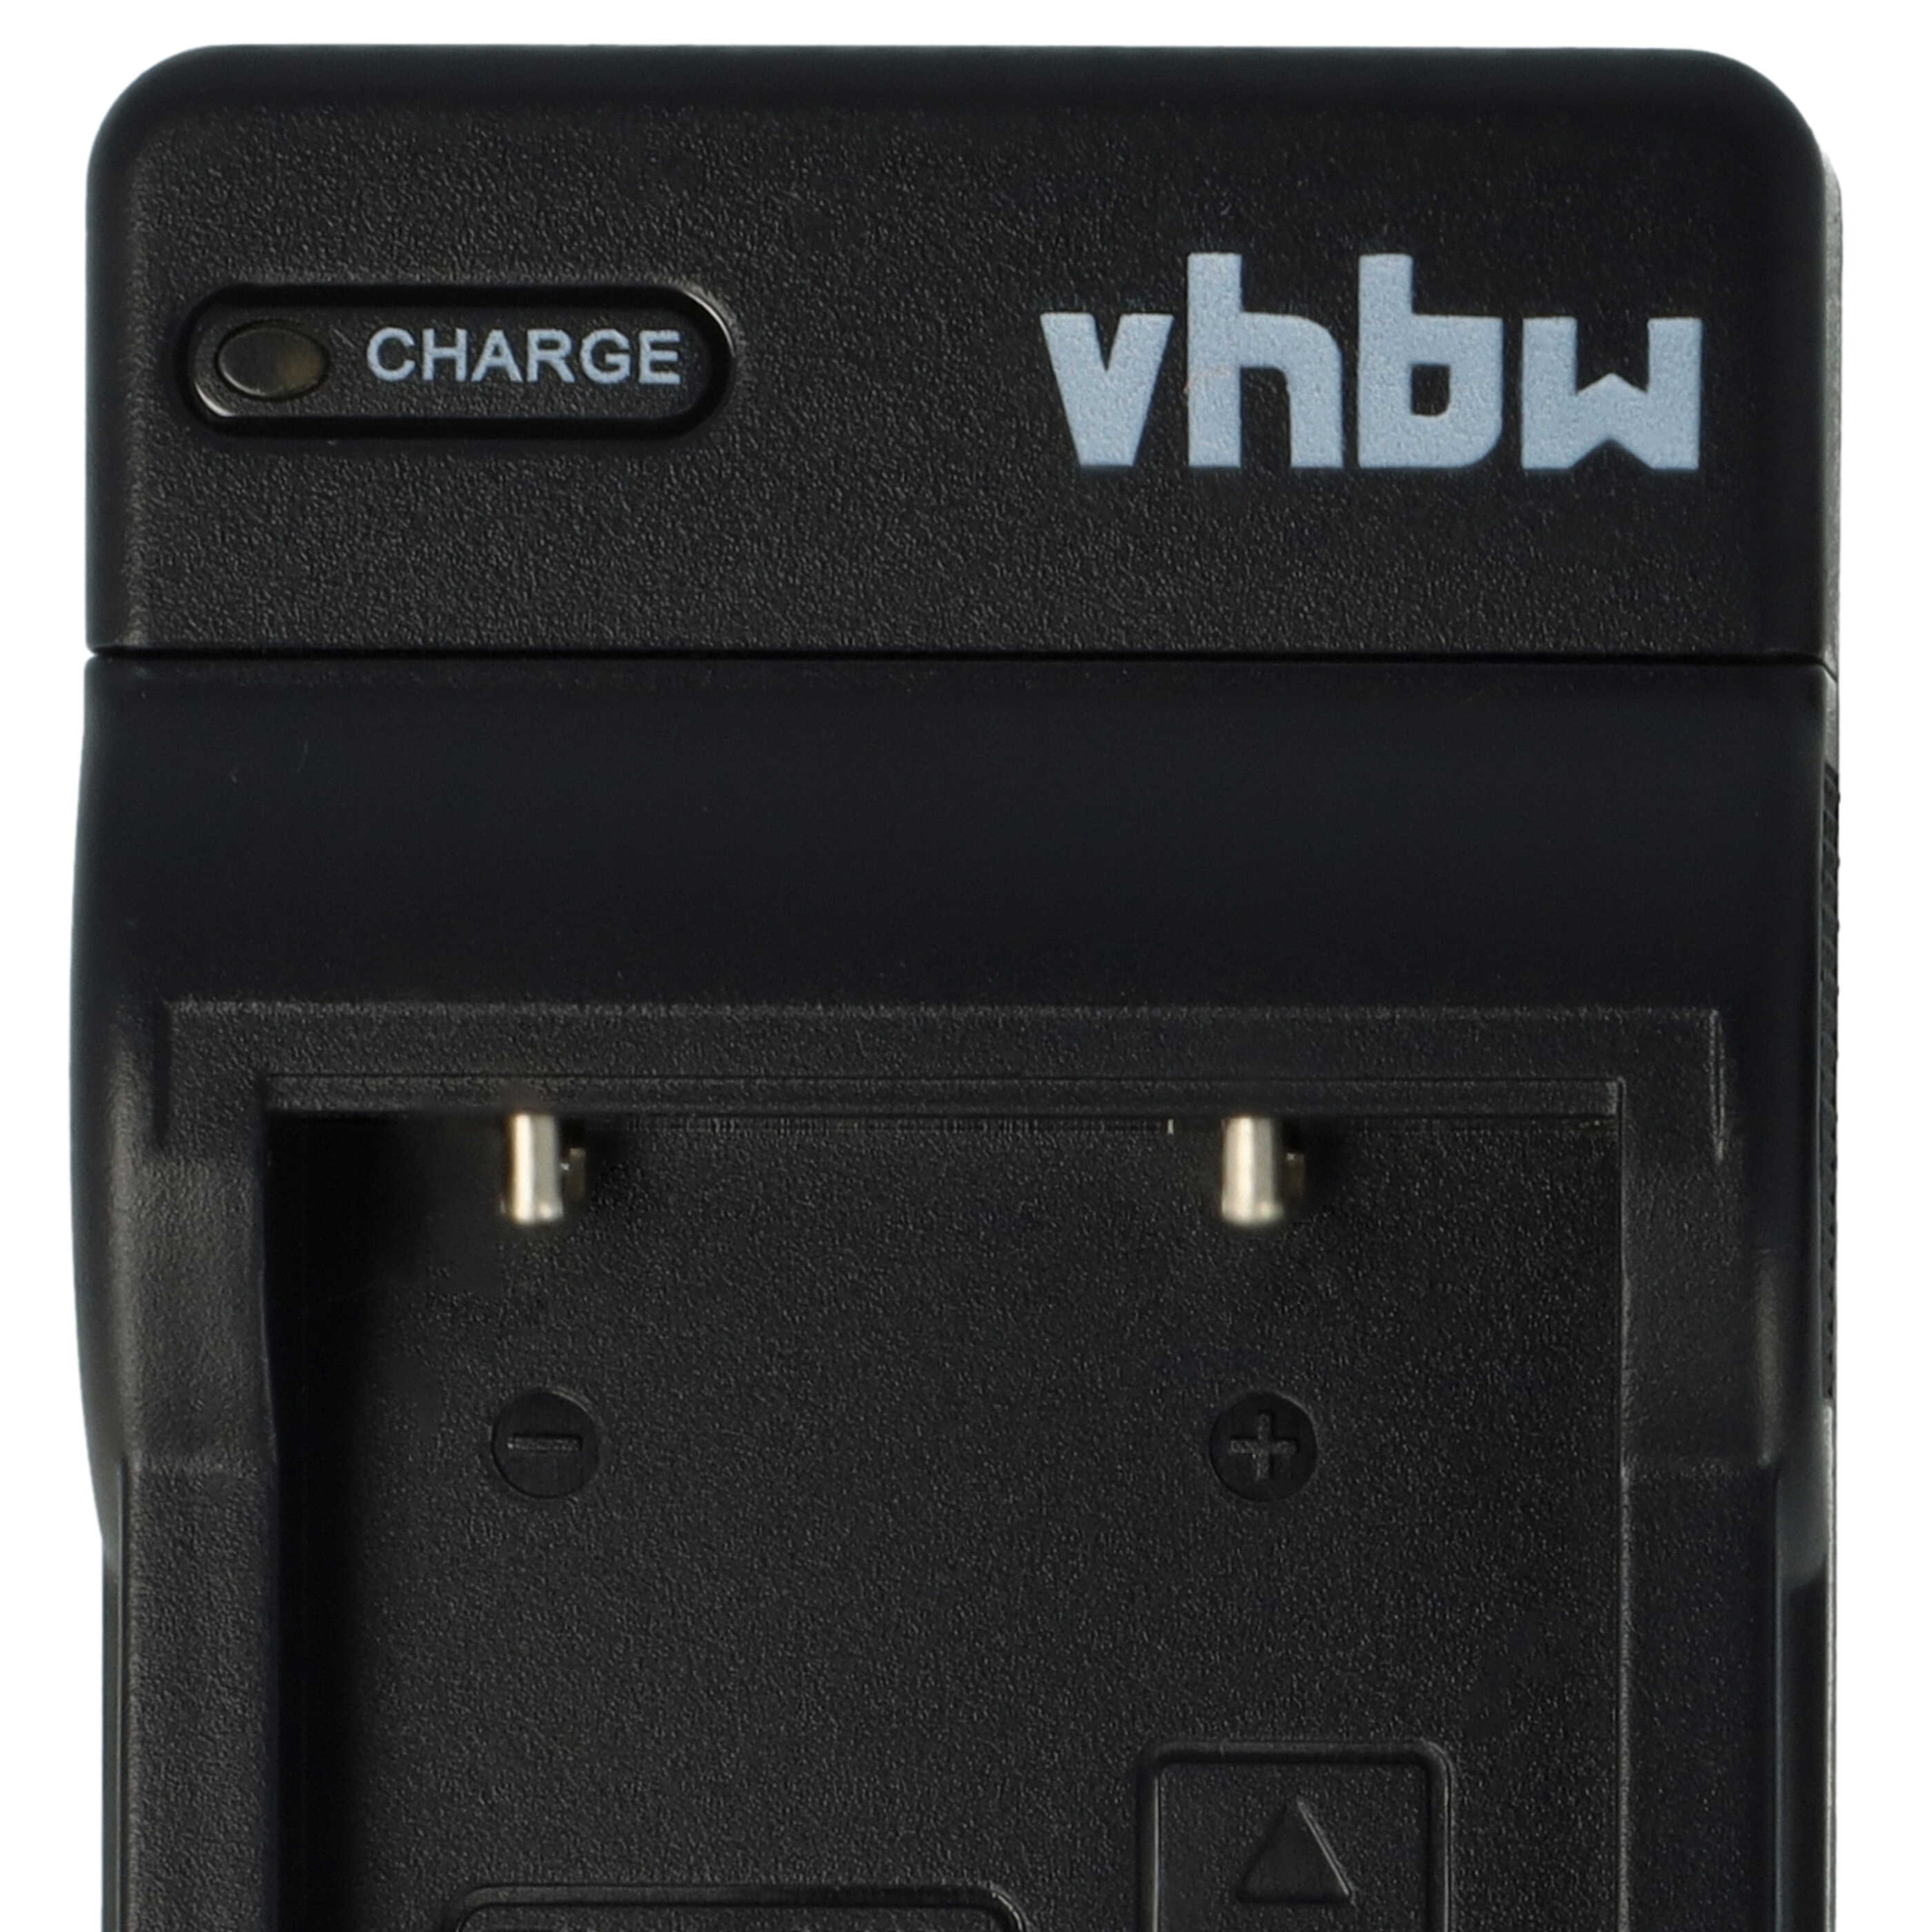 Battery Charger suitable for Coolpix 3700 Camera etc. - 0.5 A, 4.2 V